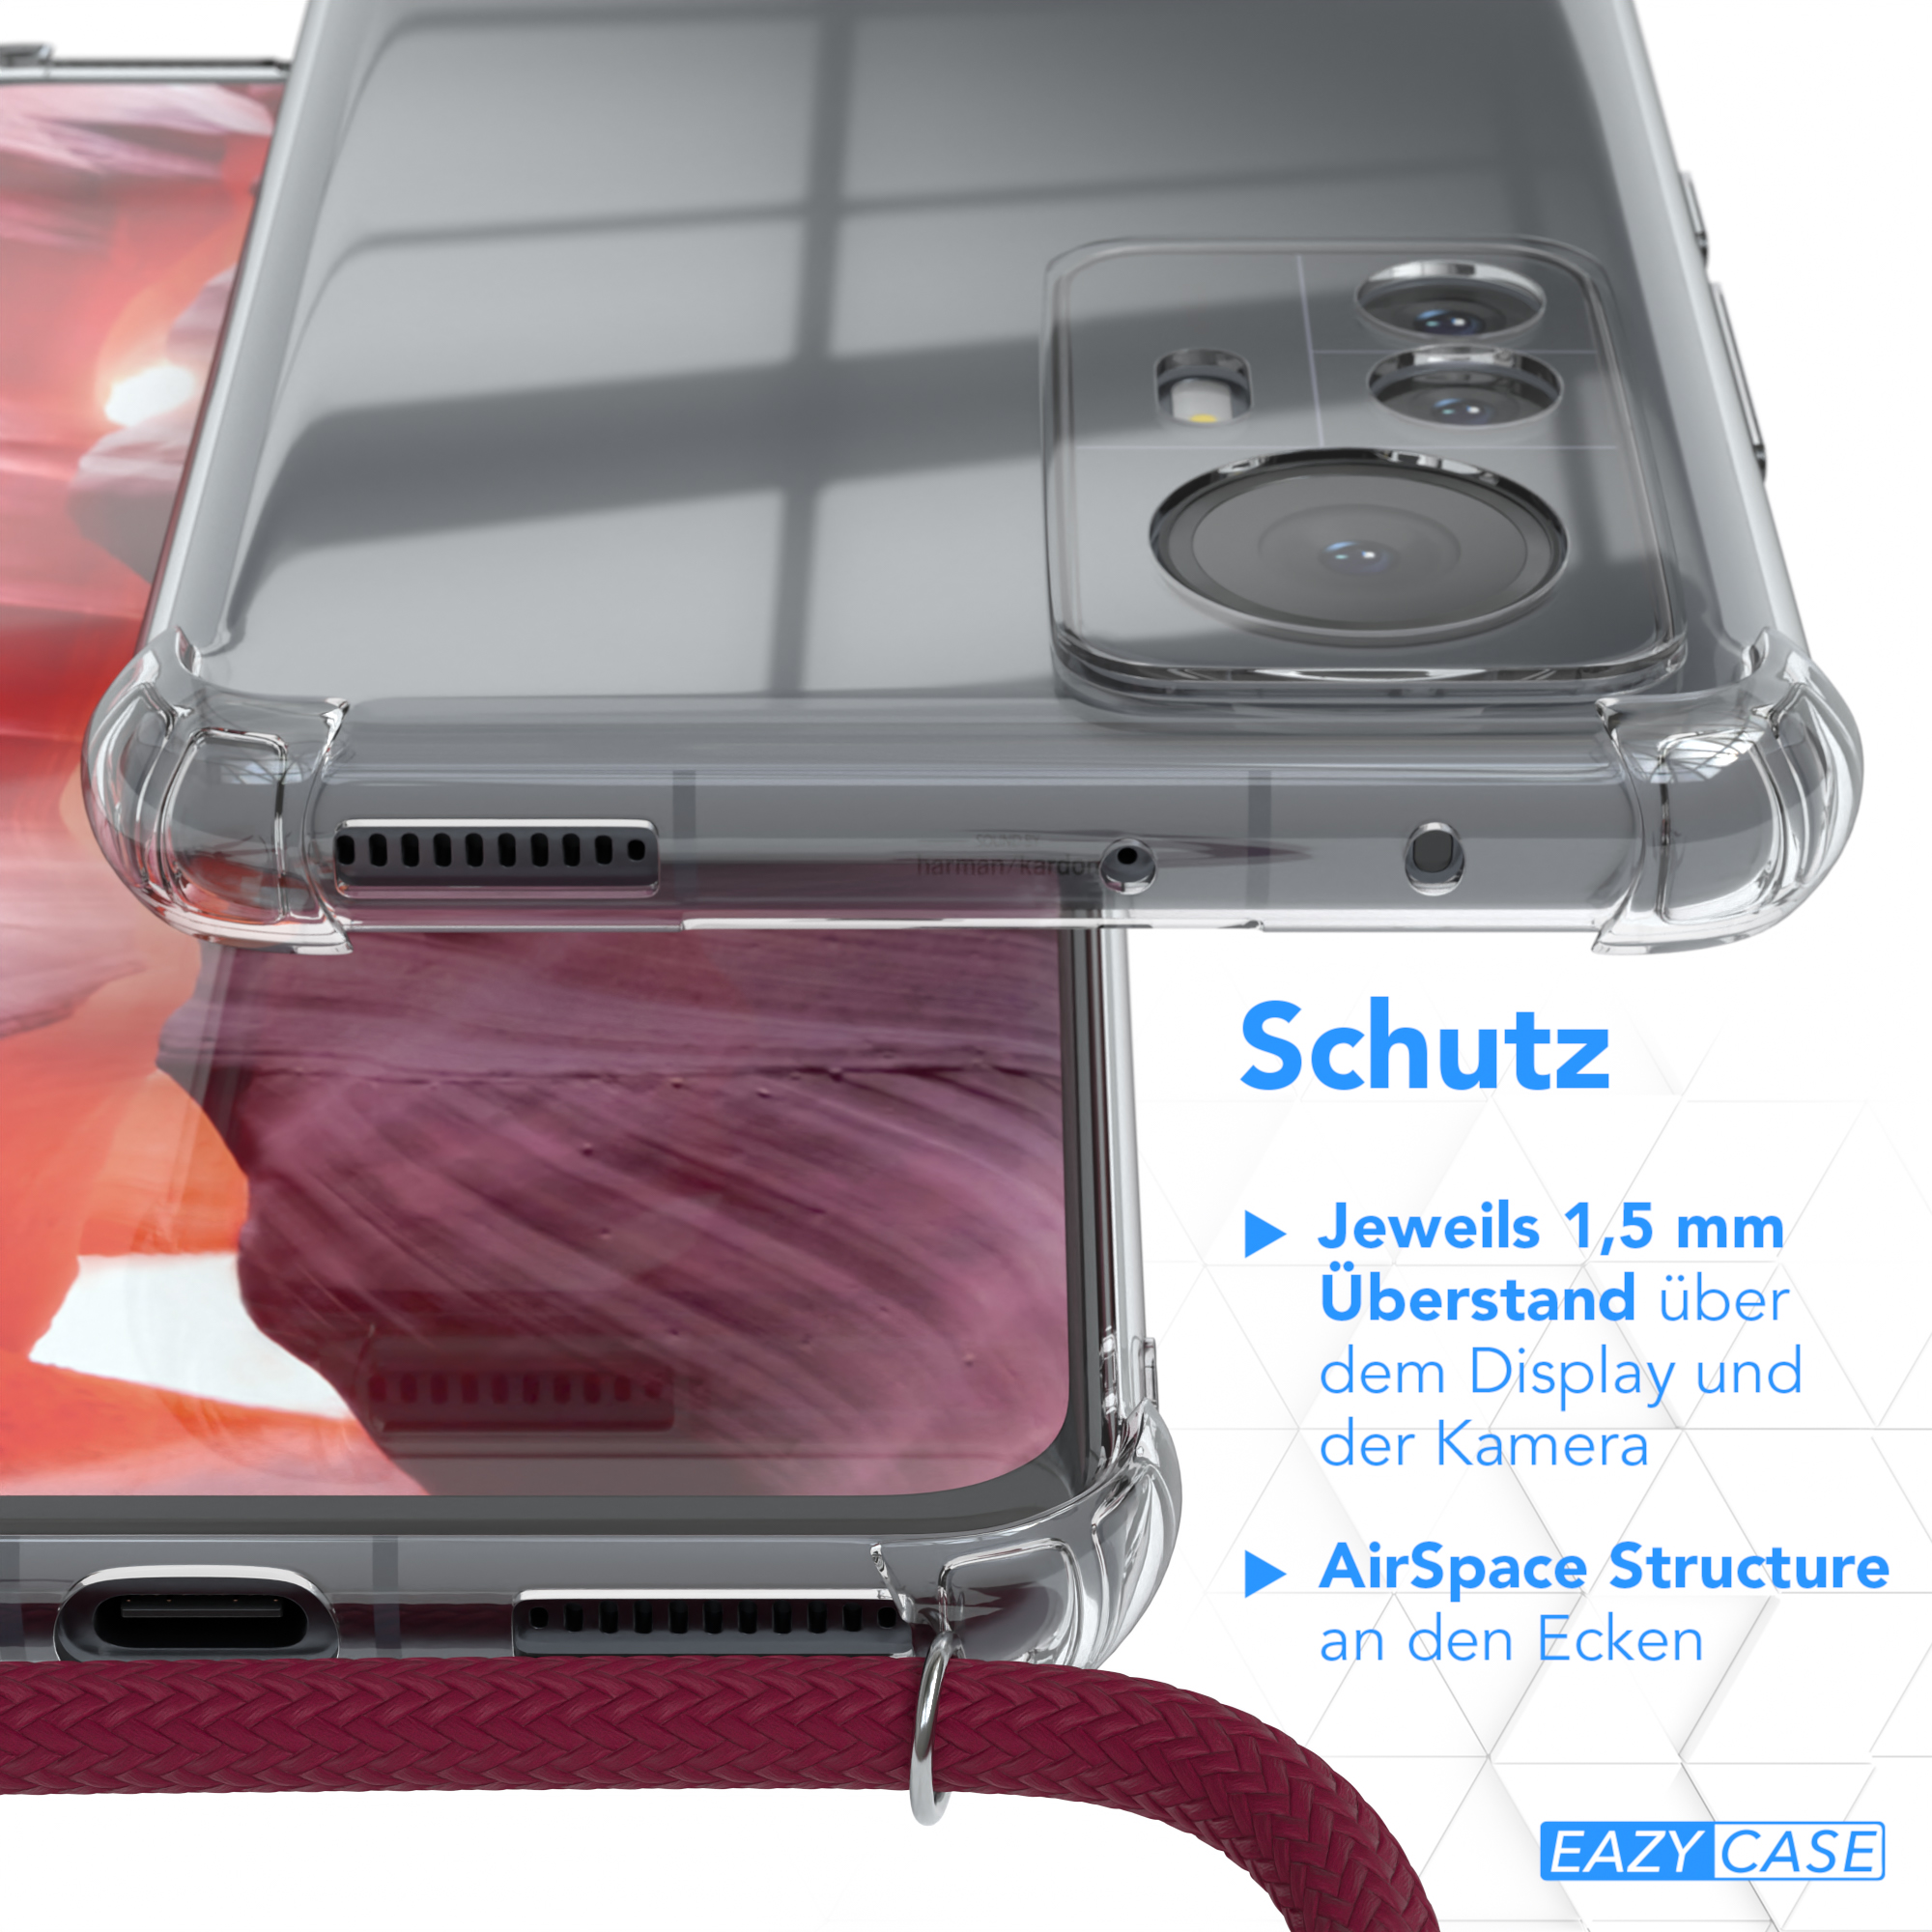 12 / Umhängeband, mit Umhängetasche, CASE Cover Rot Silber Bordeaux Xiaomi, EAZY Clips Clear Pro,